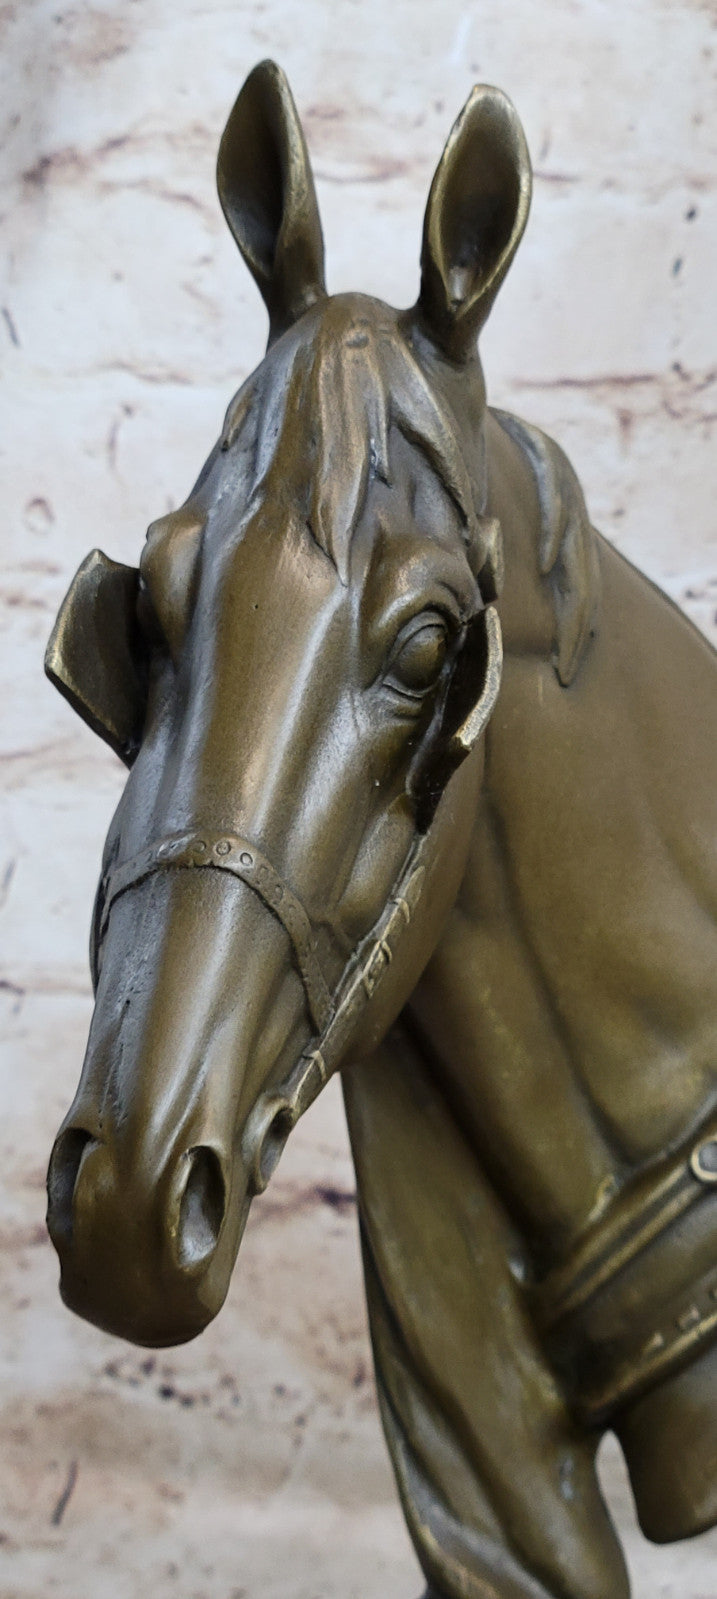 Handcrafted bronze sculpture SALE Decor Home Barye Marble Head Horses Cast Hot